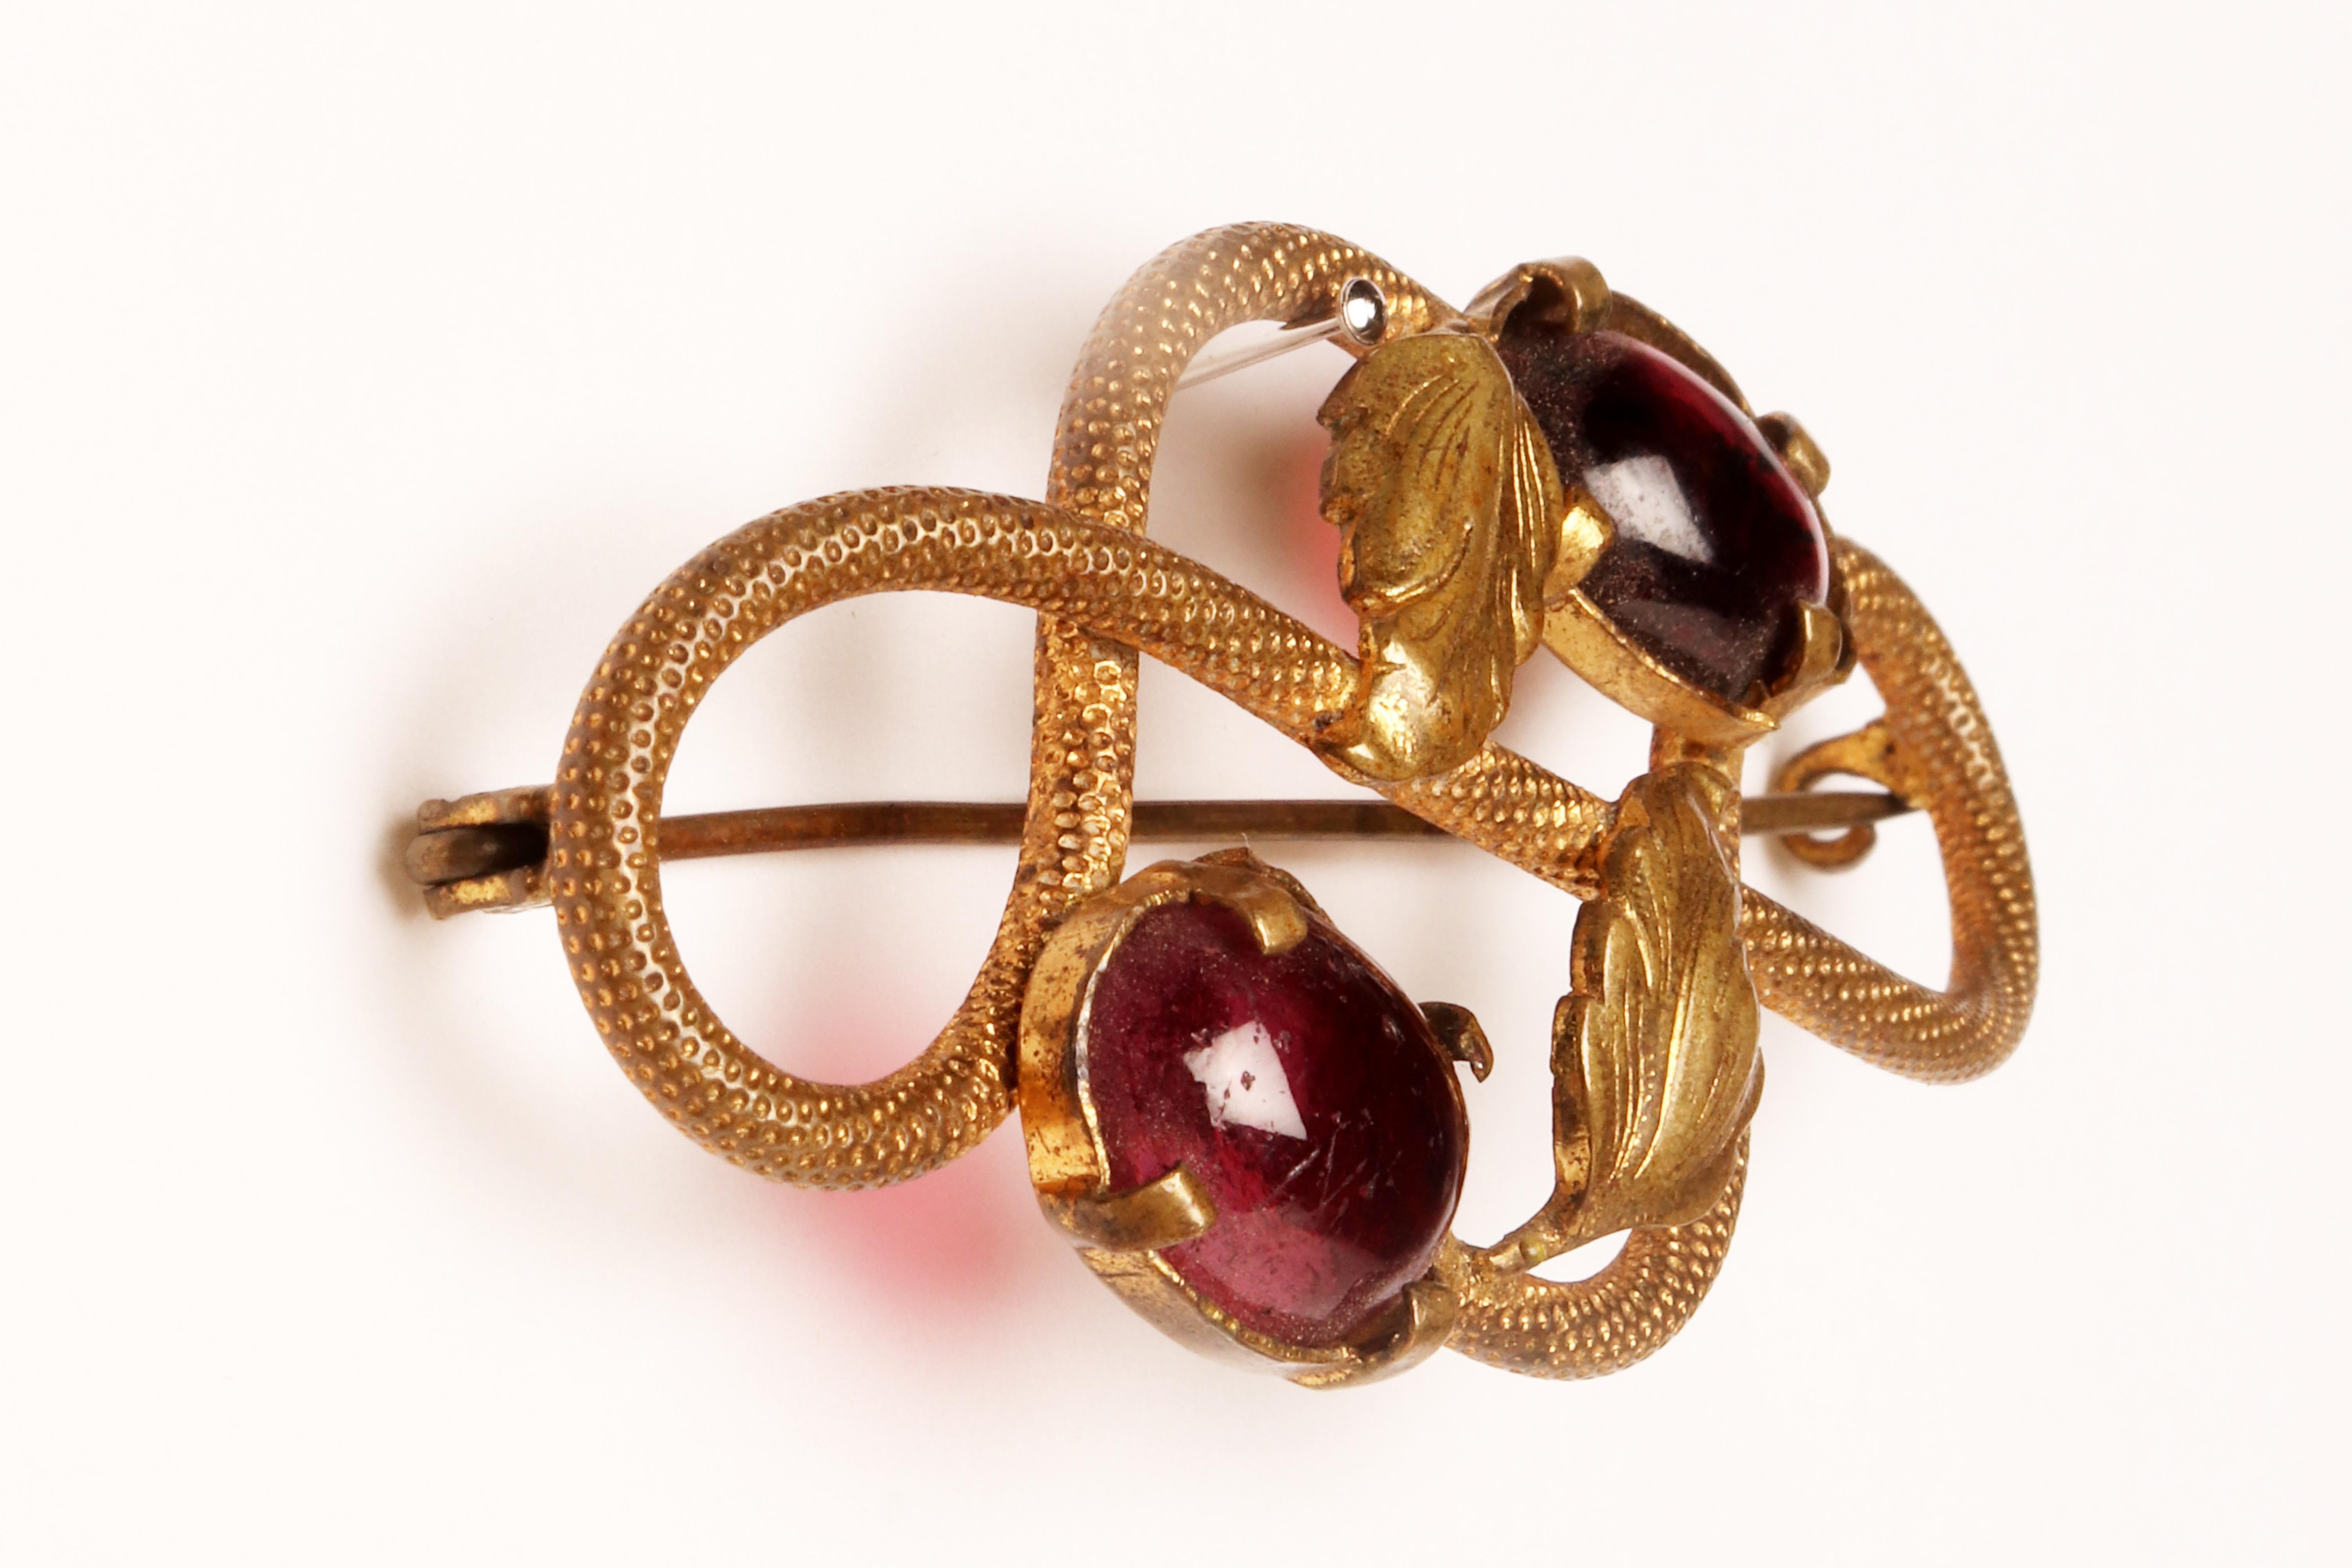 Austrian Victorian brooch in gold and garnets, Austria 1870. For Sale